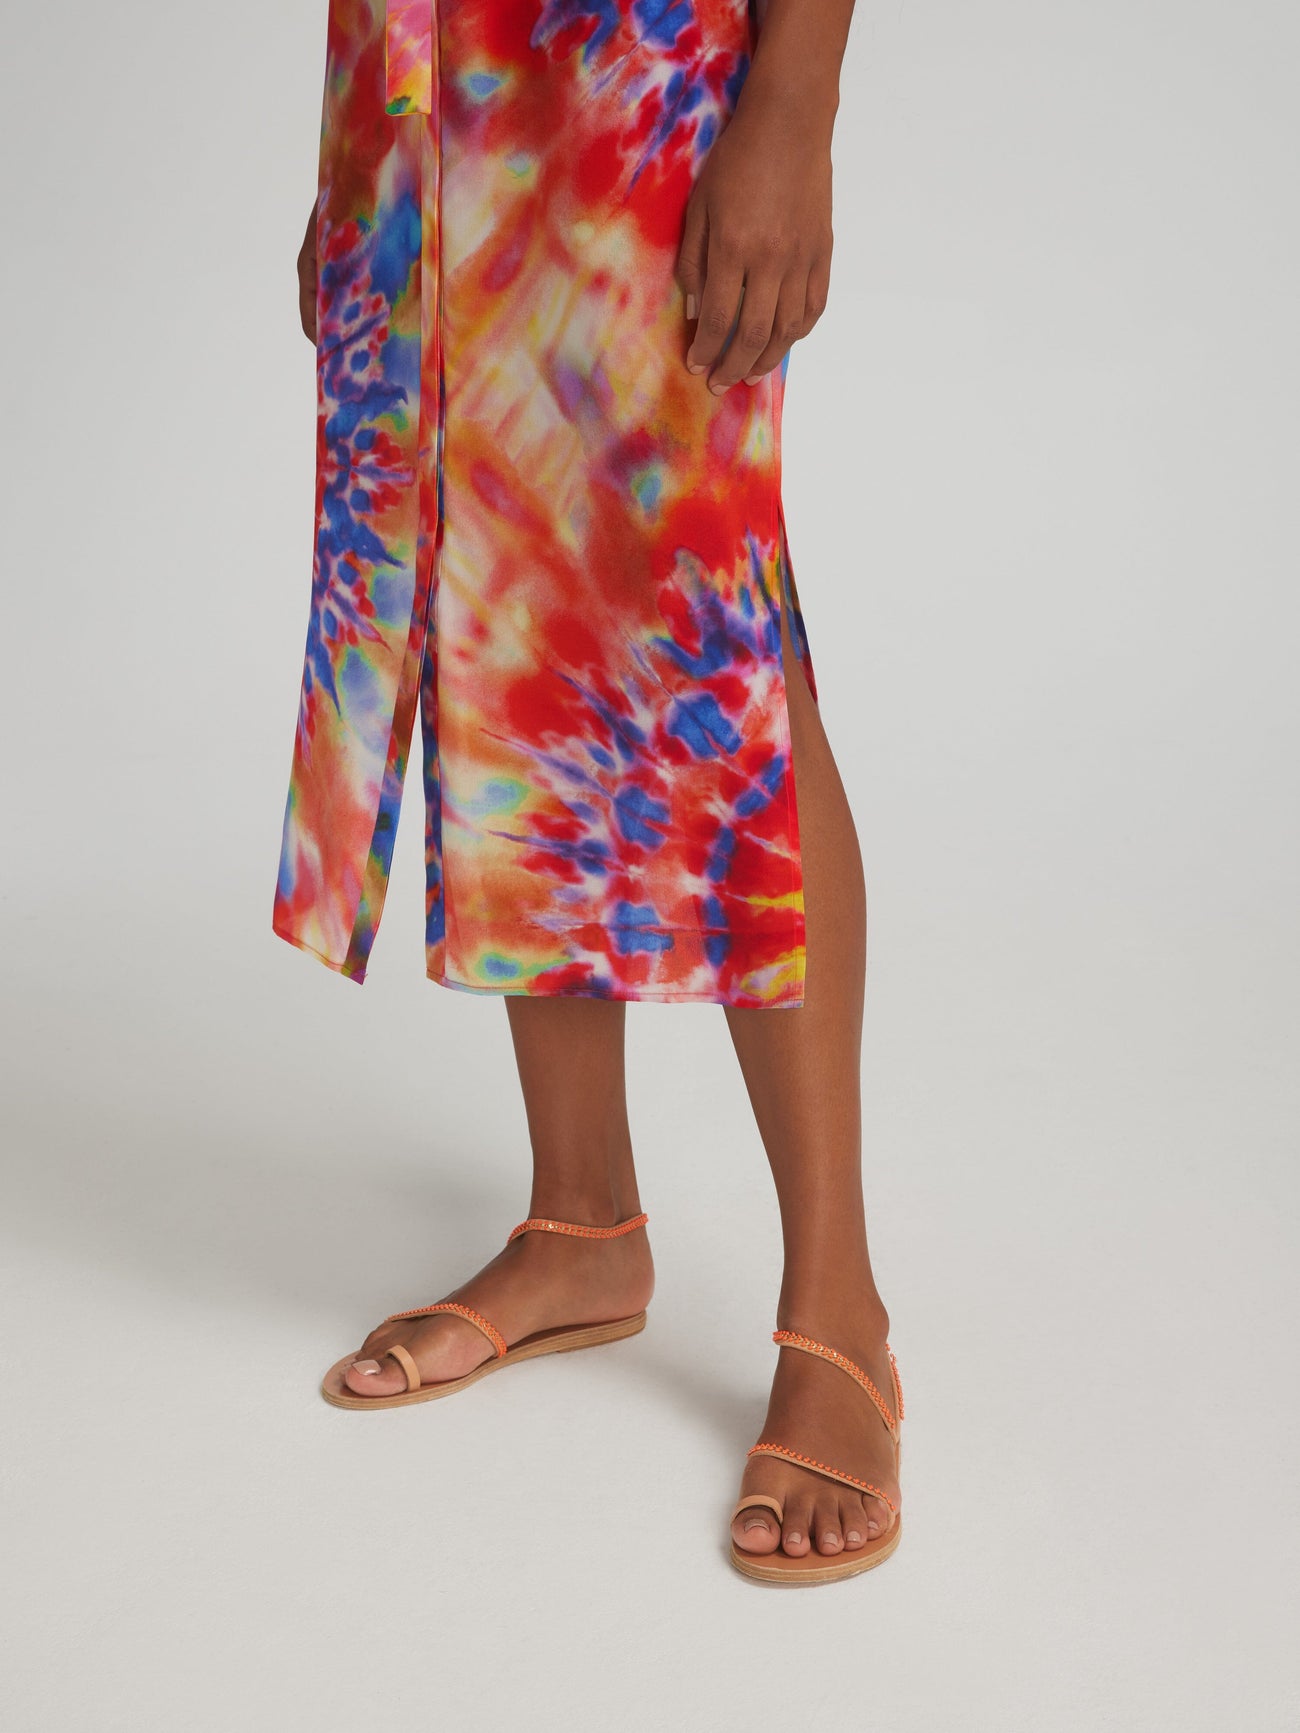 Load image into Gallery viewer, Venyx Vicki Dress in Psychedelic Tie Dye